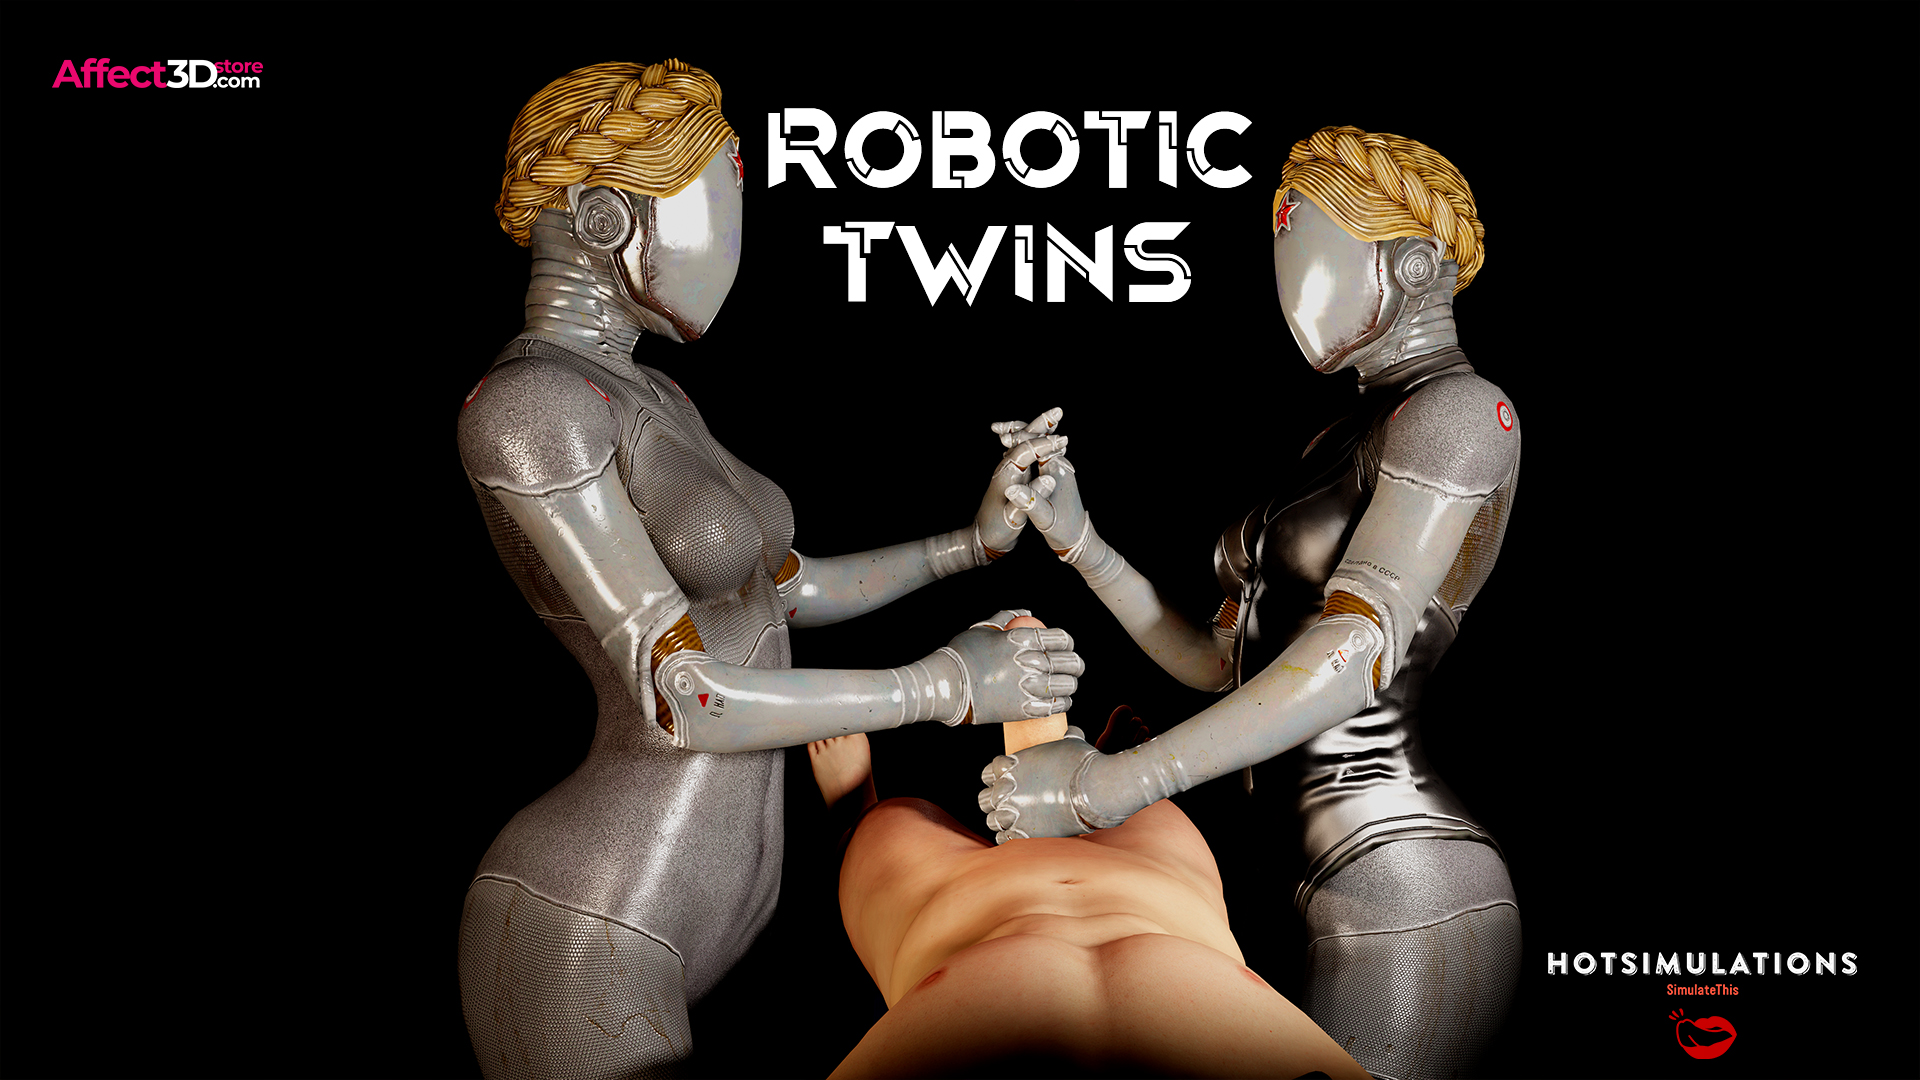 Twins Sex - Robotic Twins Level Up Sex in HotSimulations' Latest Video! - Affect3D.com